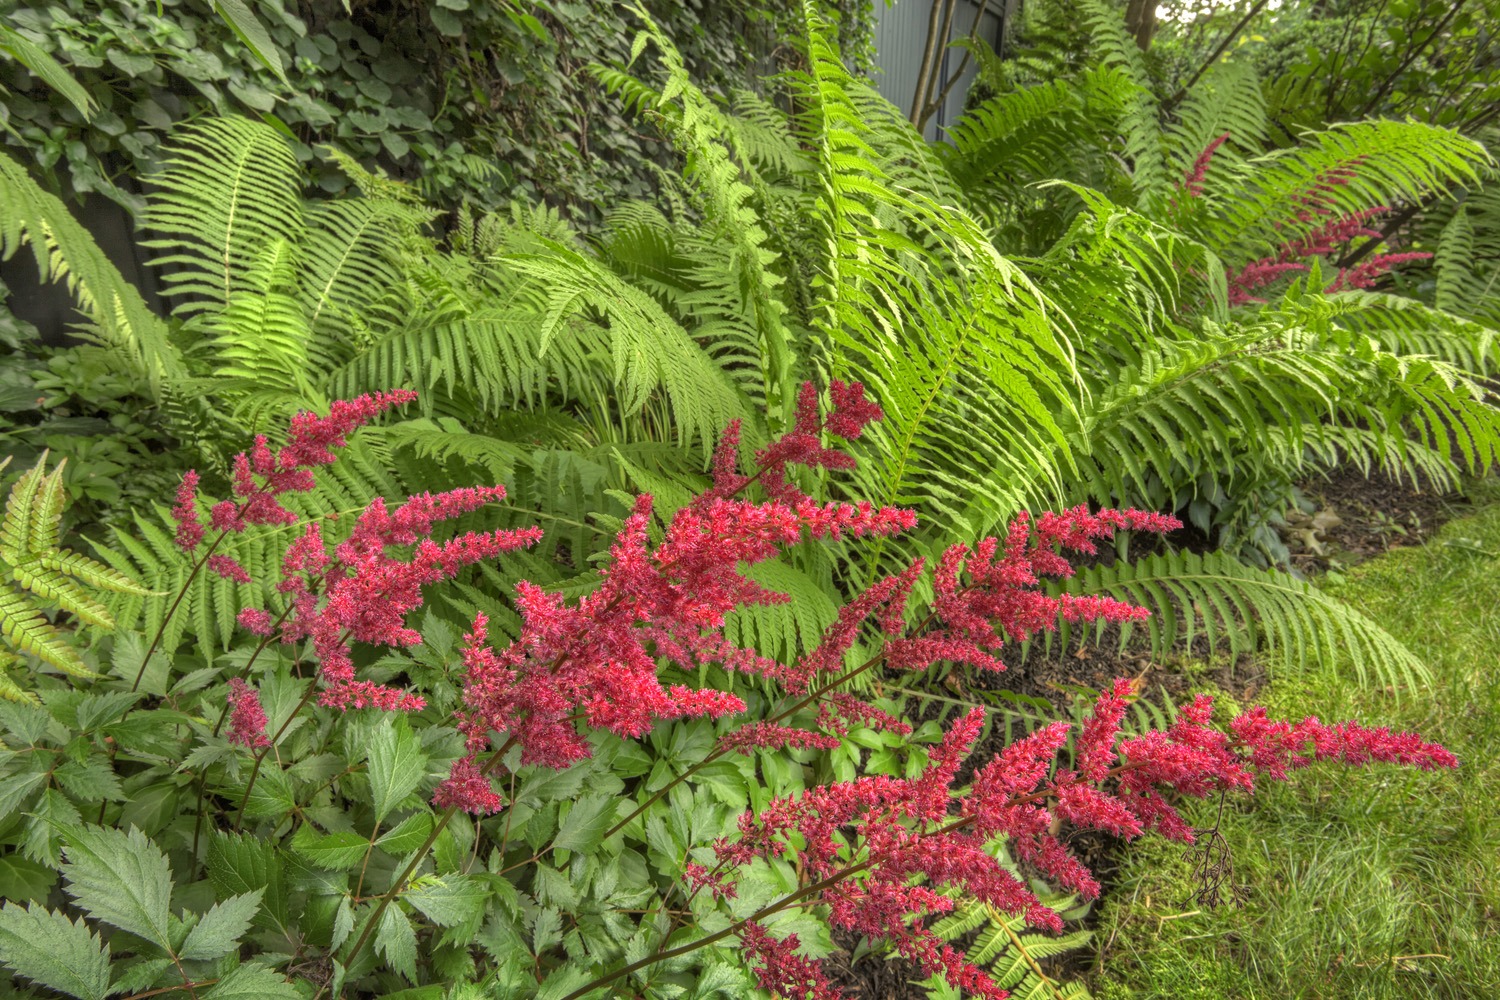 The image displays a lush garden with vibrant, red-pink flowers foreground and large, green ferns situated against a background of dense foliage.